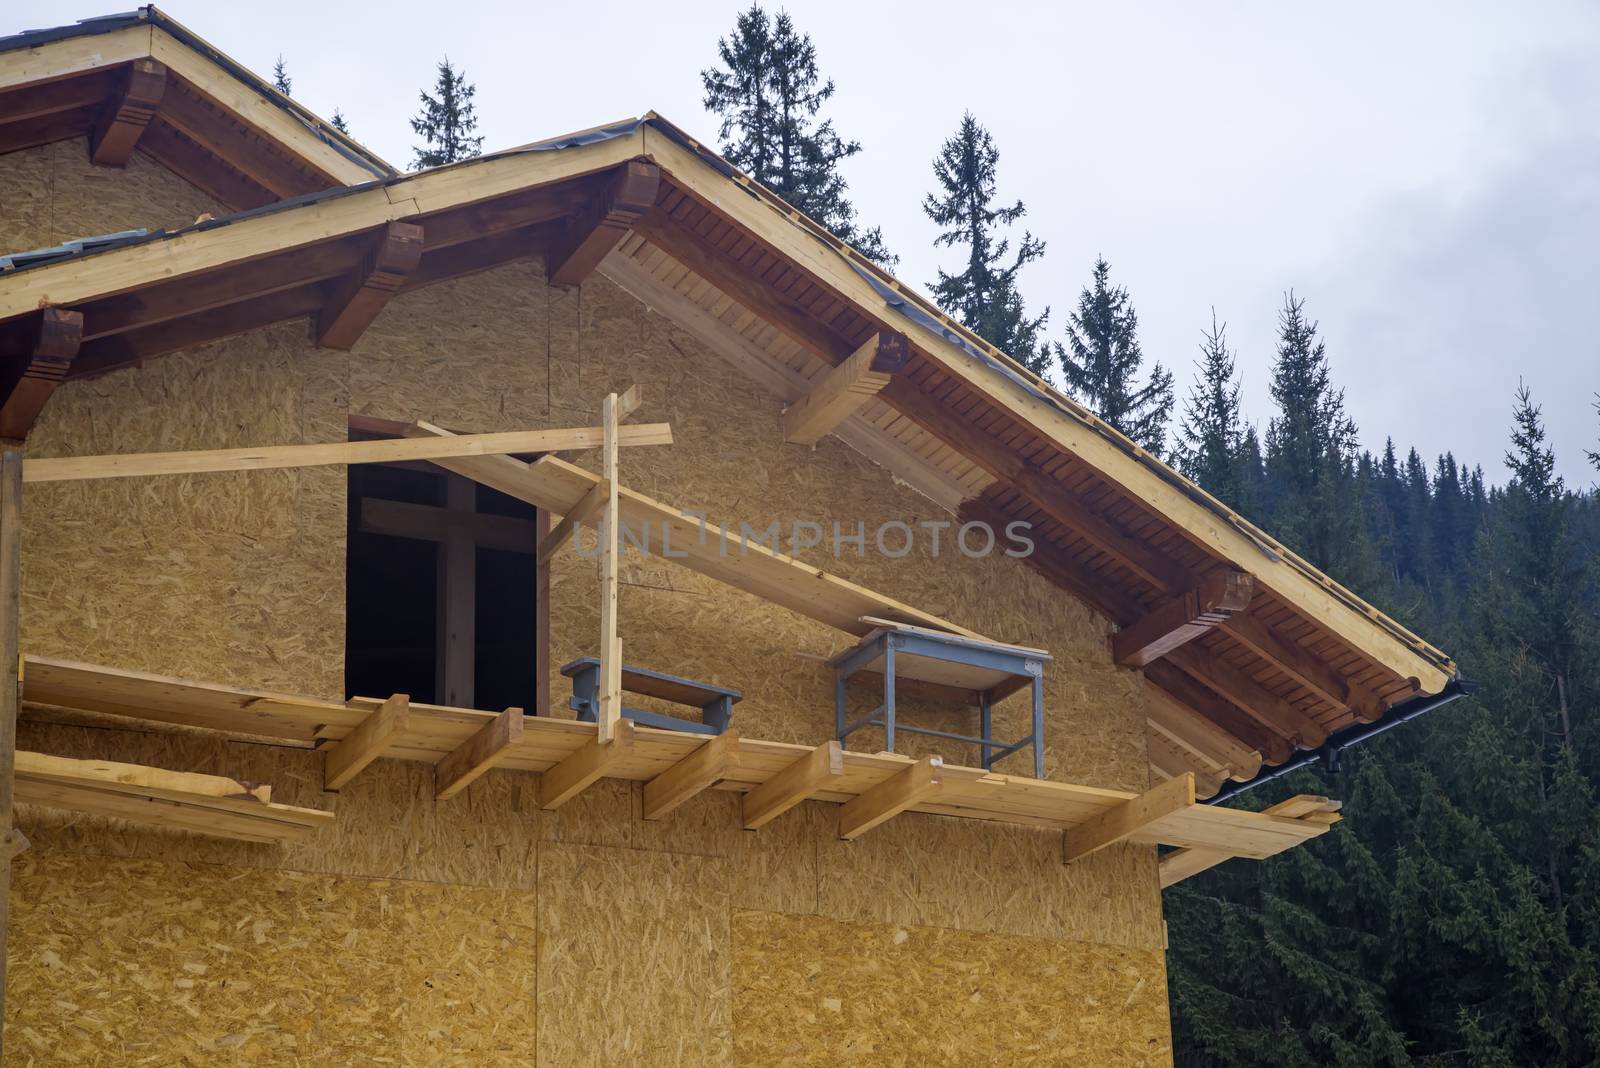 Wooden chalet construction in the forest, exterior works